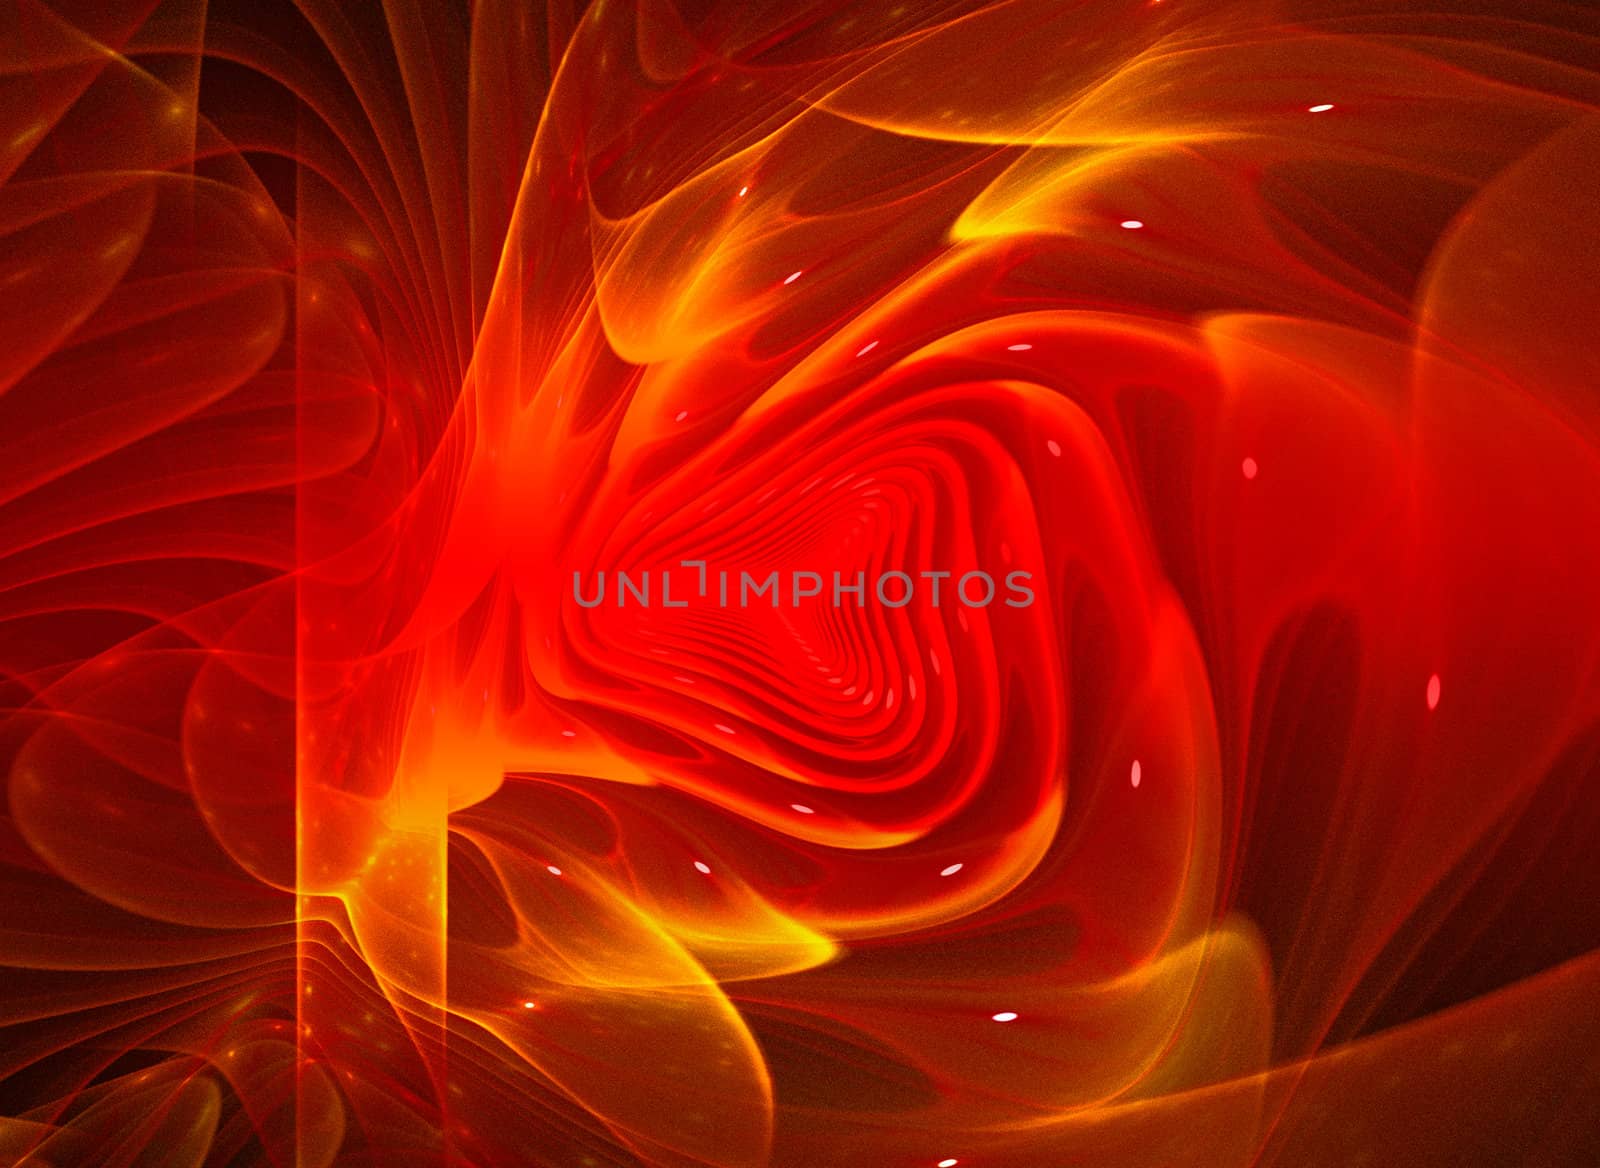 Power, abstract structures in red on a dark background by FernandoCortes